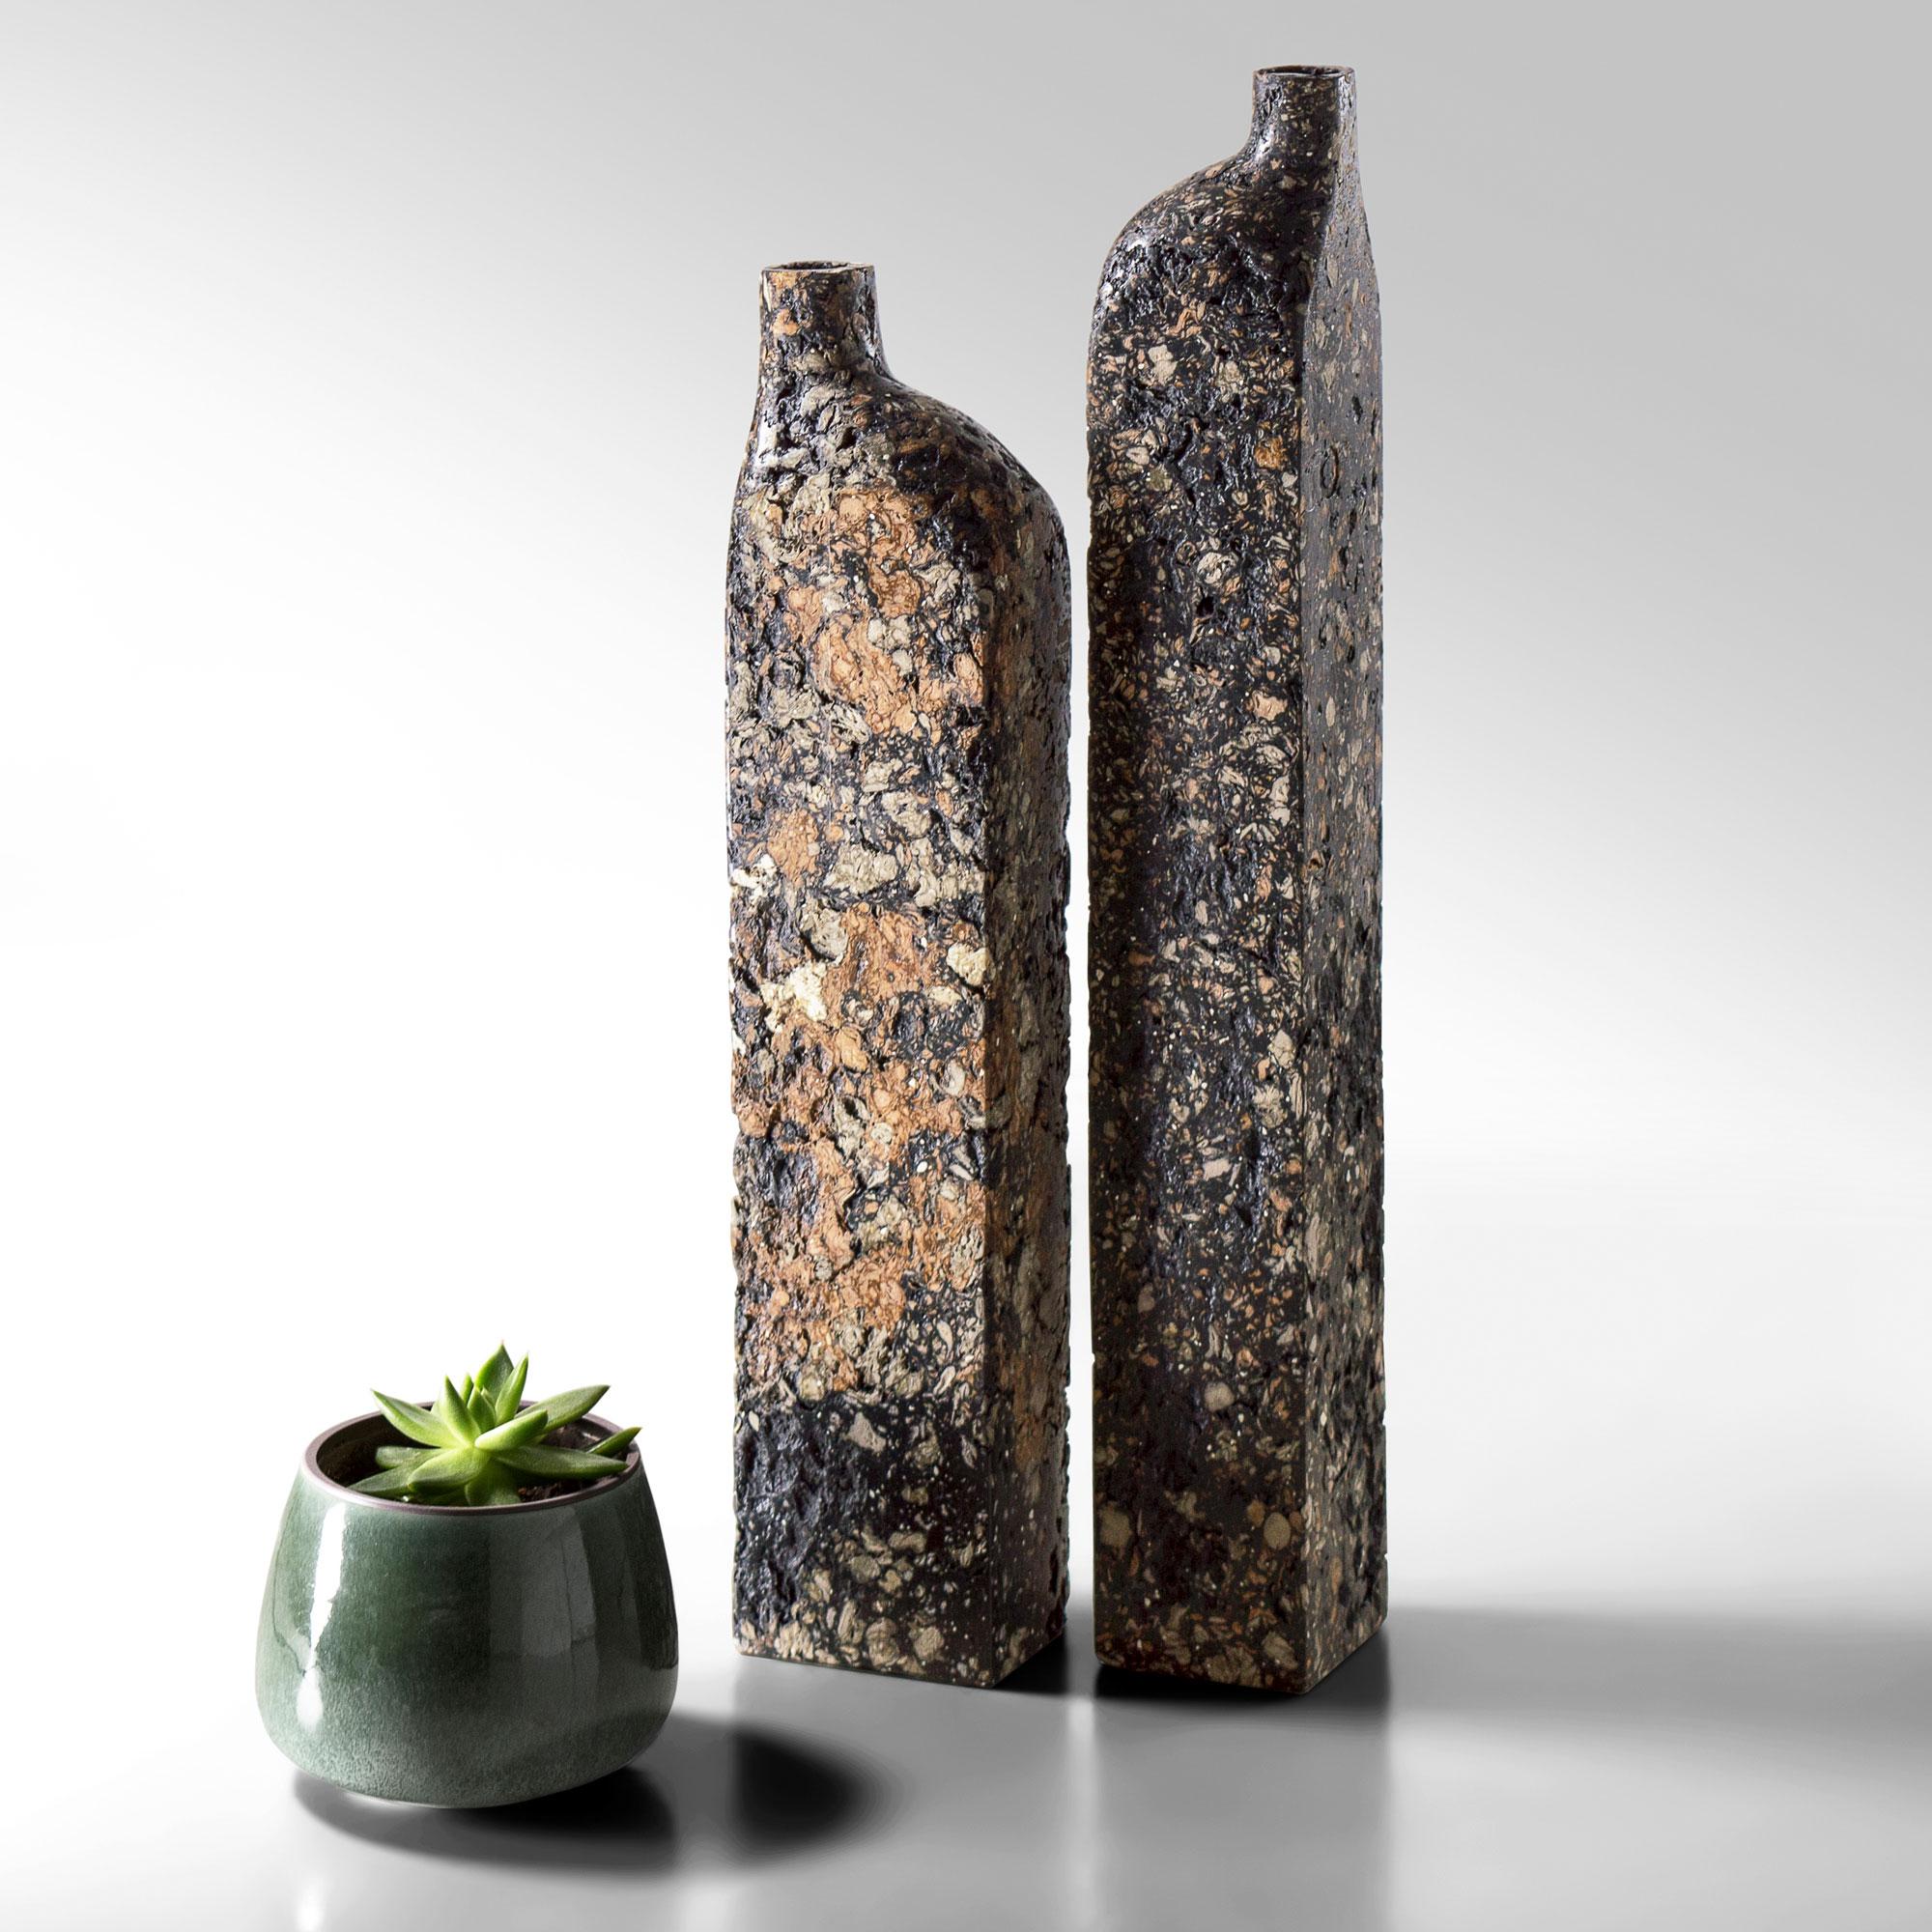 Set of two vases

A fusion of sturdiness and elegance, archaism, and modernity. A distinctive feature of vases is how they all resemble sculptures. It is a functional piece of art adding a unique touch to any interior.

The material from which the